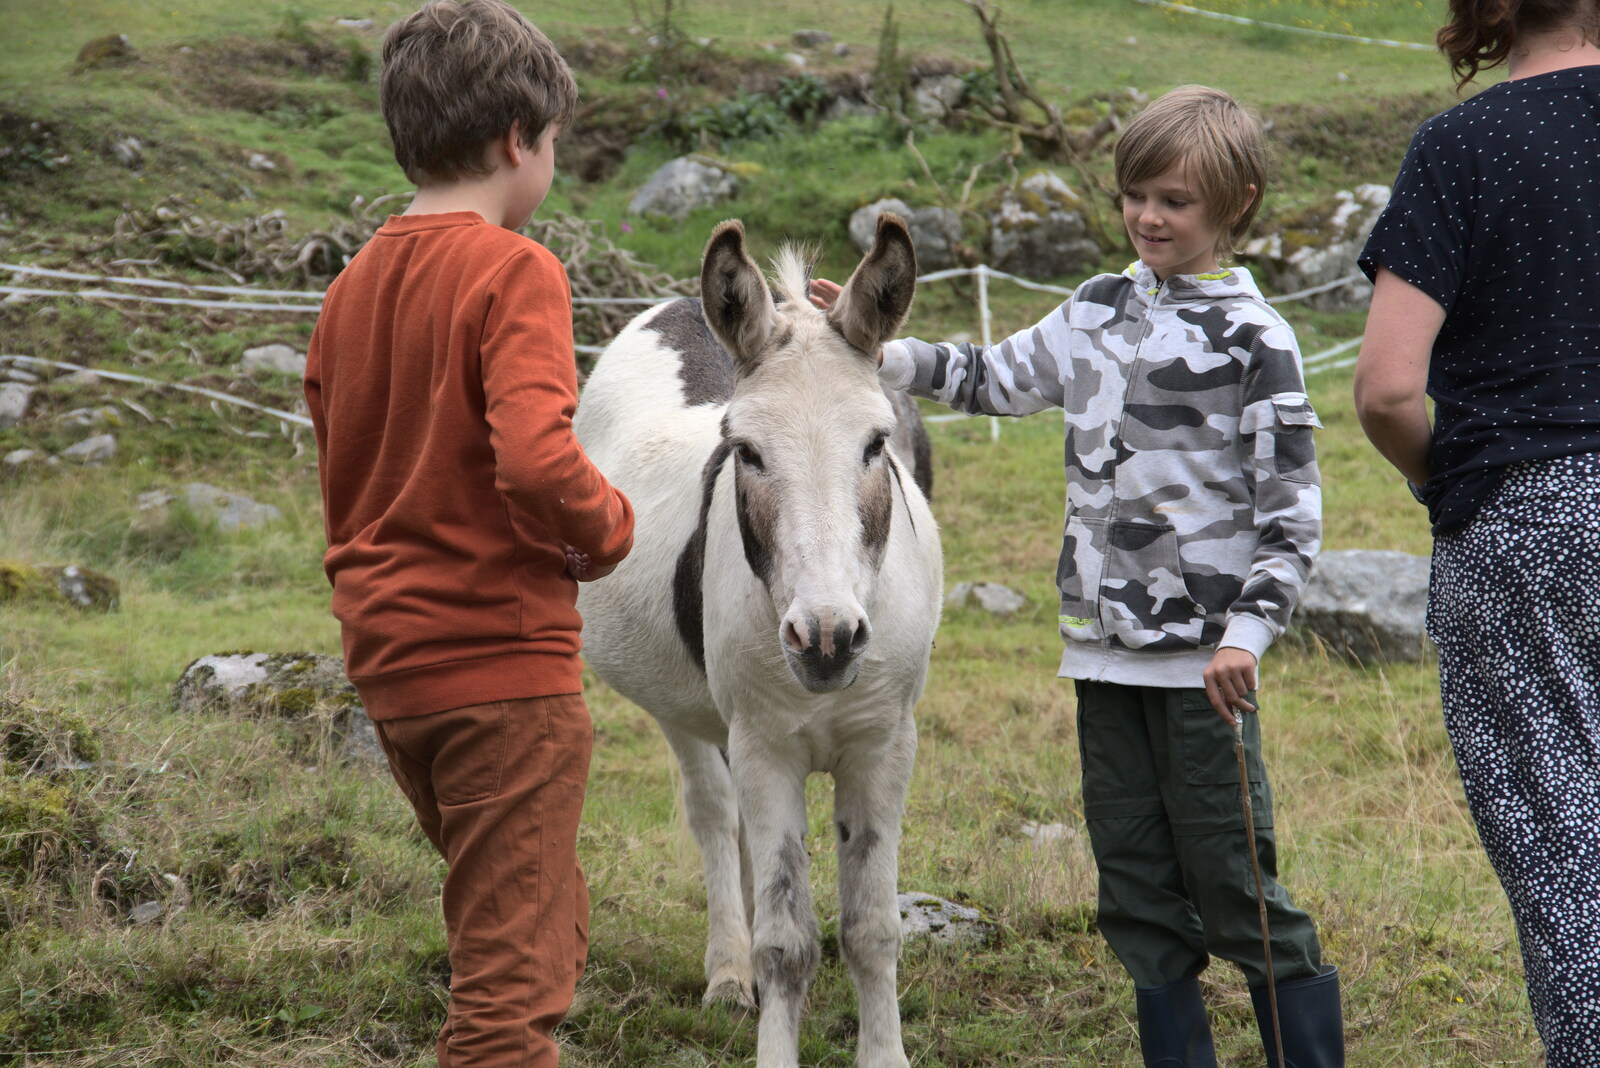 The boys meet the donkeys from A Trip to Noddy's, and Dublin City Centre, Wicklow and Dublin, Ireland - 16th August 2021